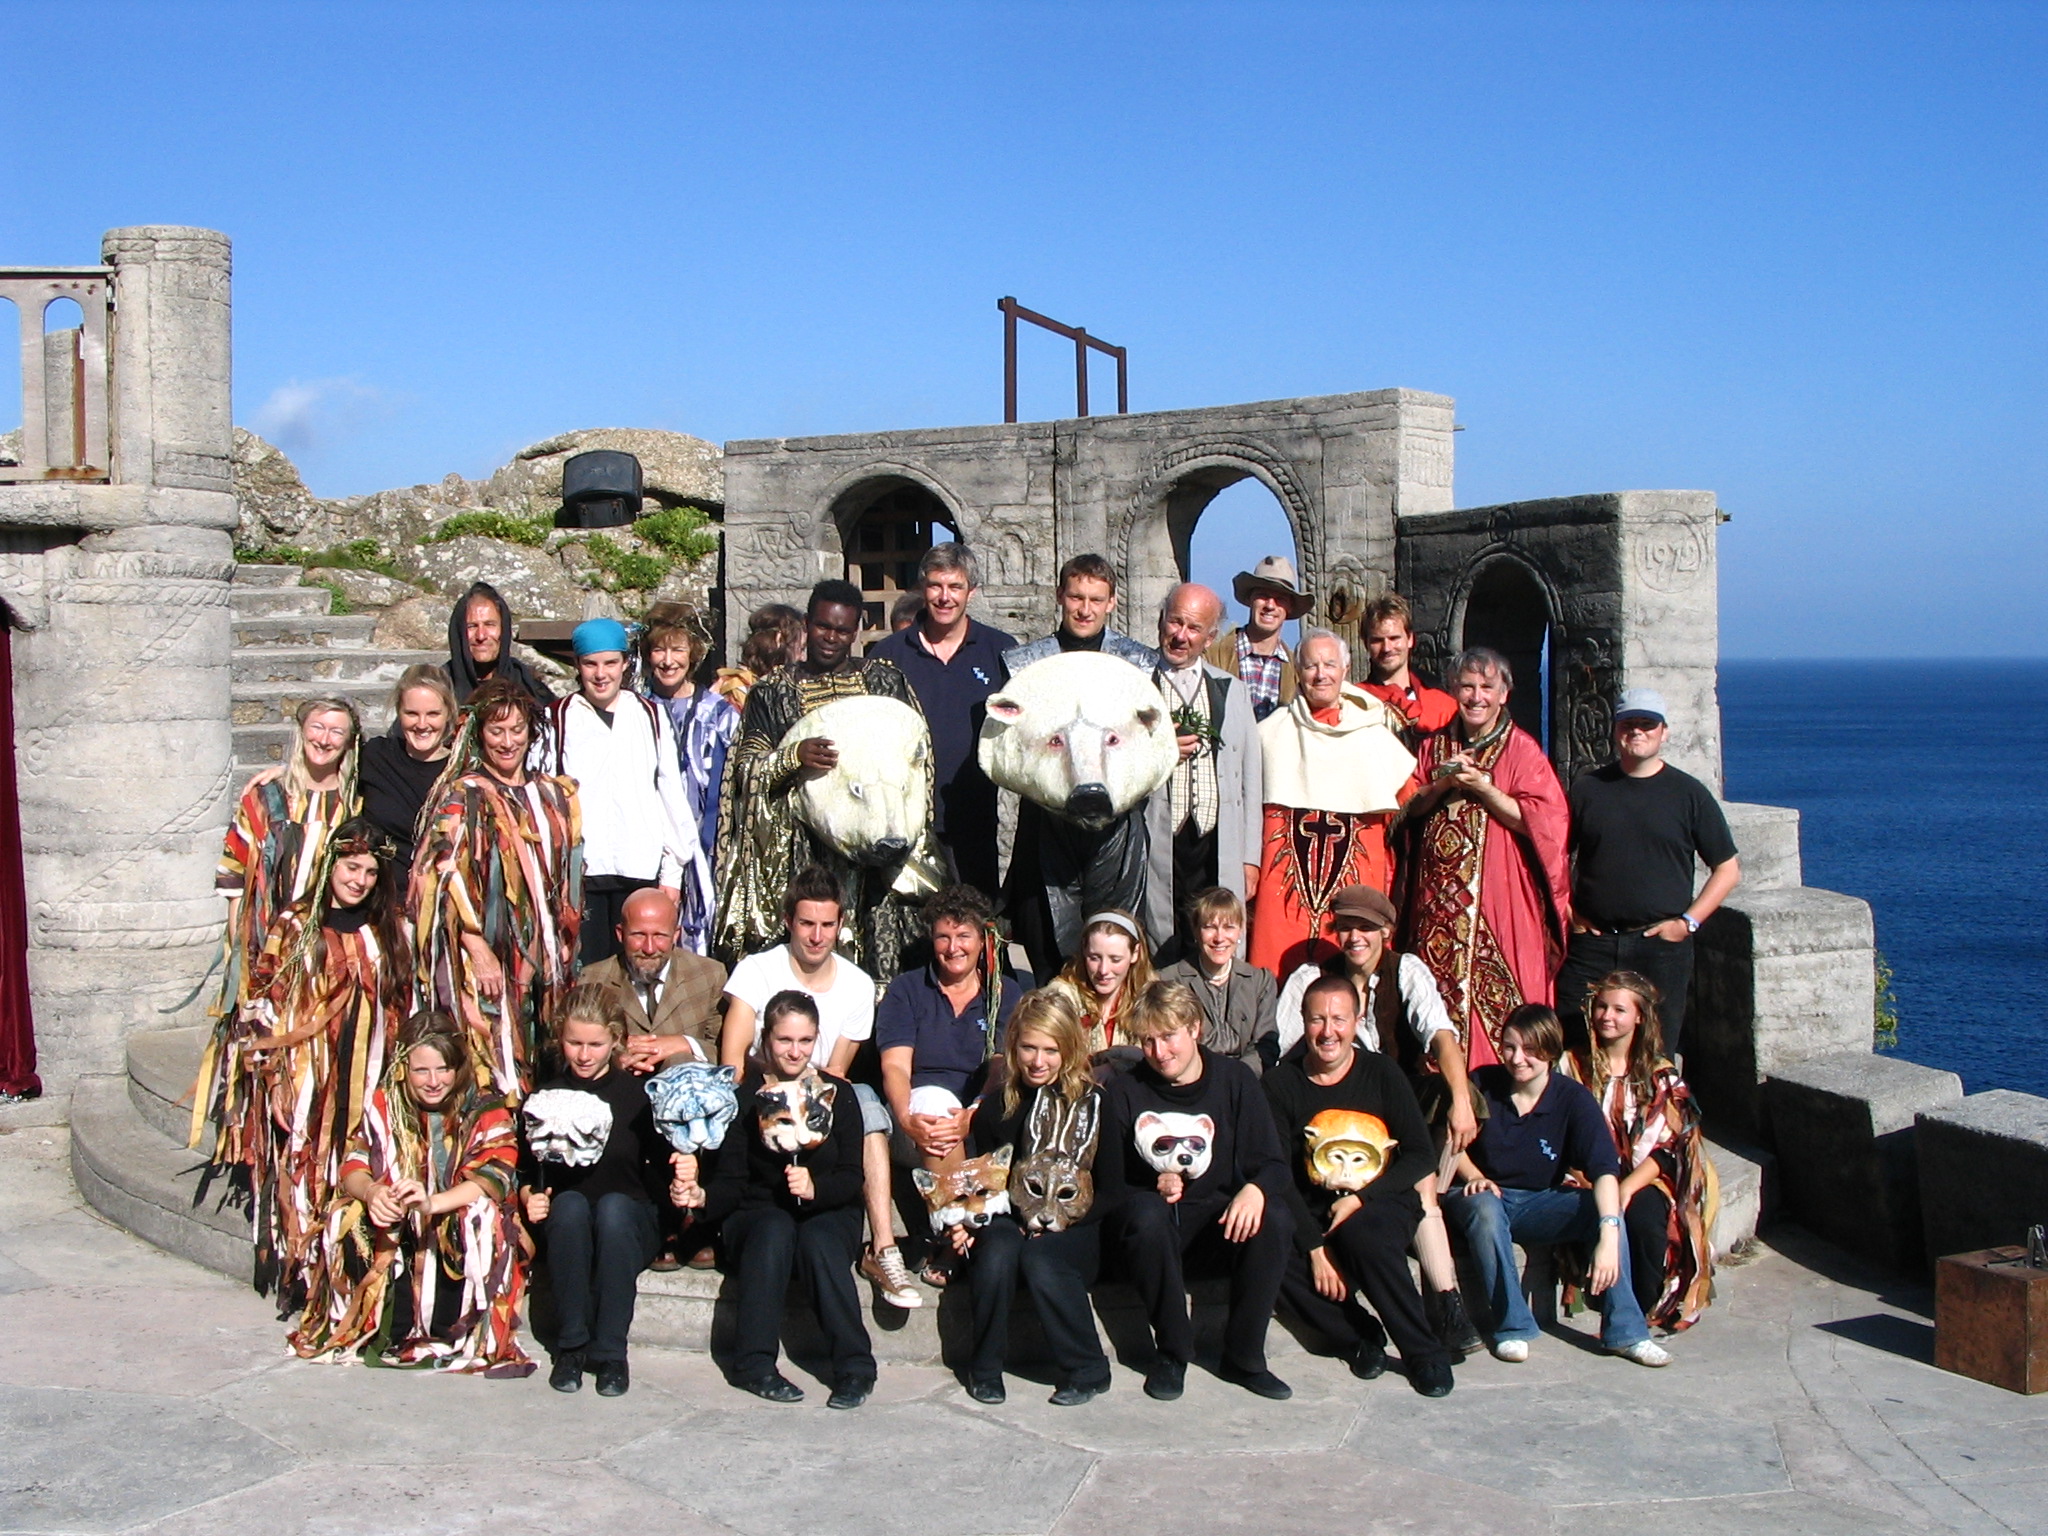 The cast and crew of His Dark Materials (2007)